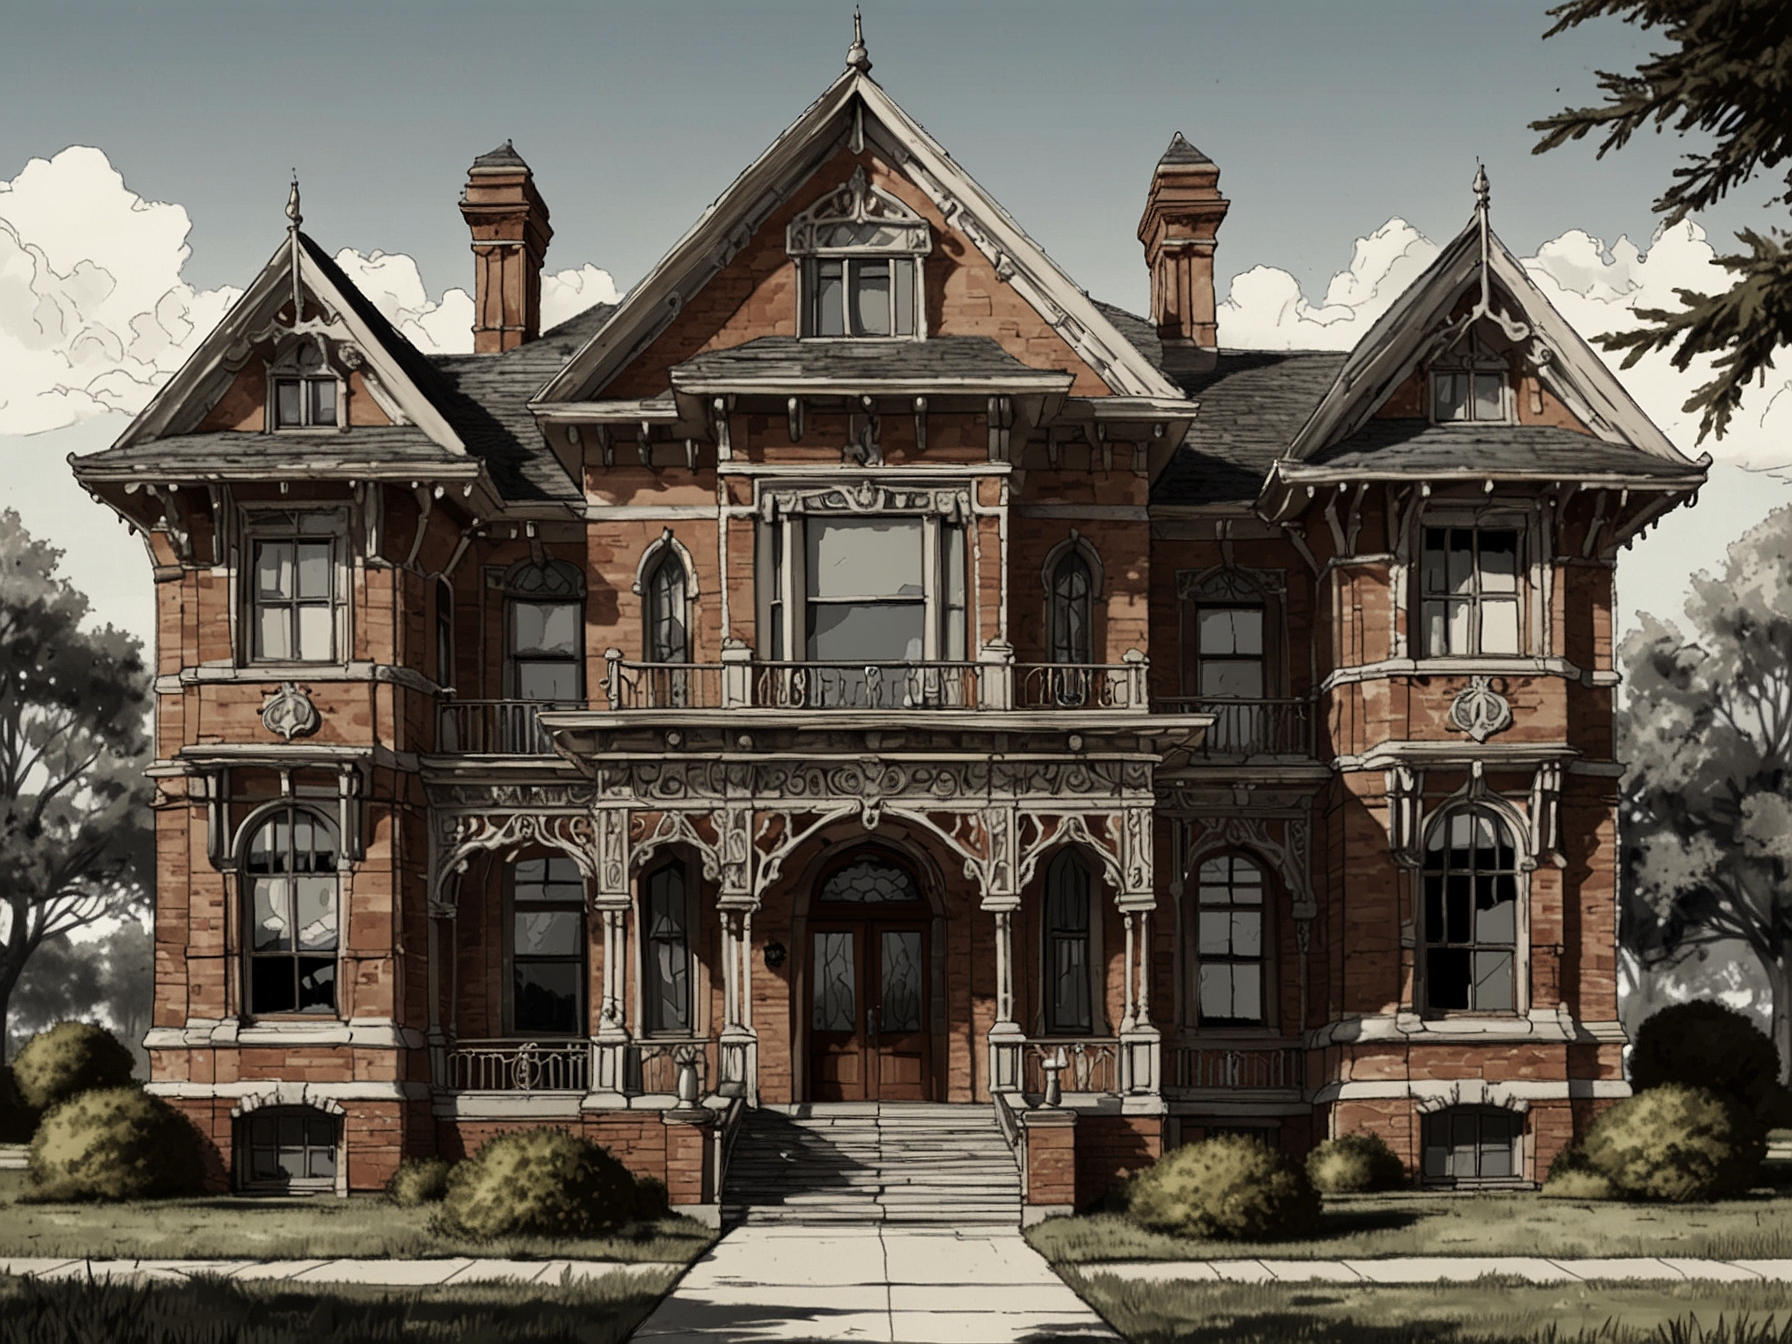 An exterior view of the historic Creswell Mansion, showcasing its Victorian-style architecture with ornate woodwork and intricate stained glass windows.